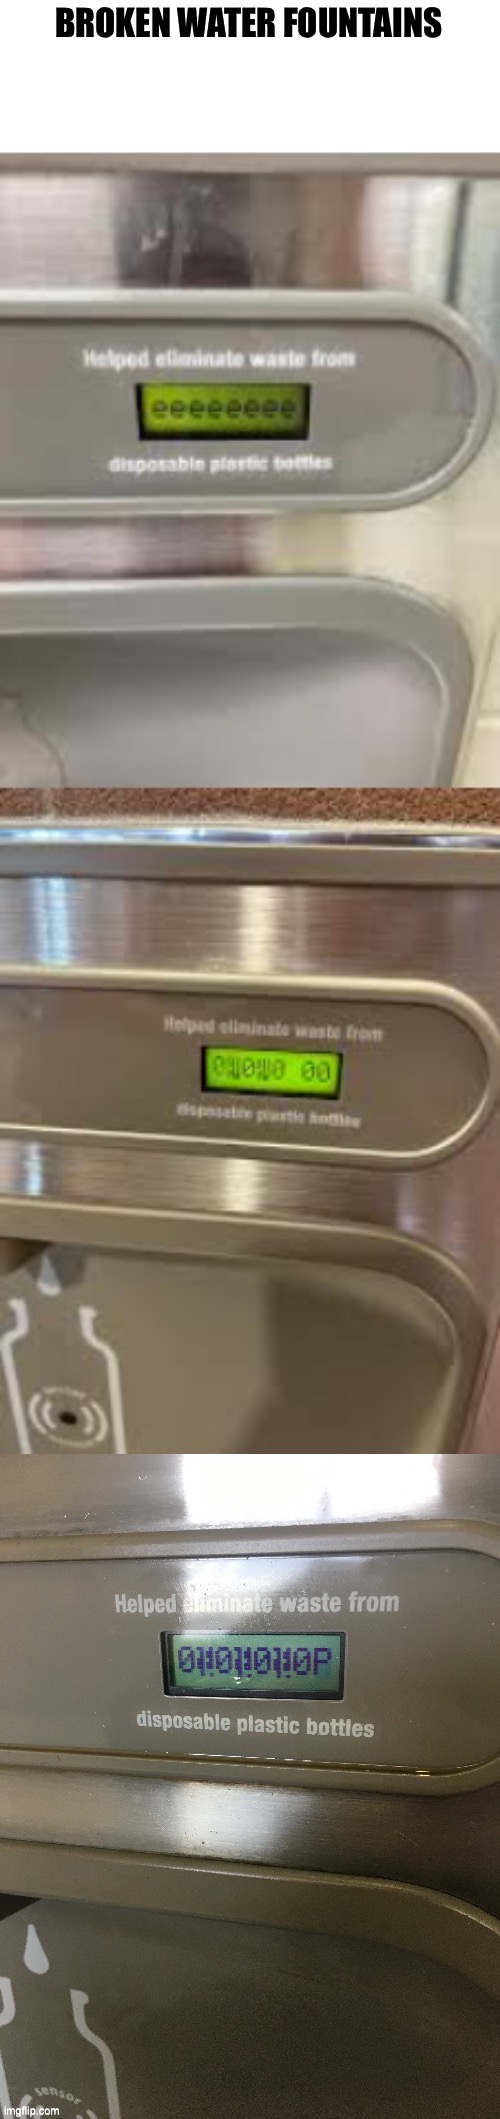 BROKEN WATER FOUNTAINS | image tagged in memes | made w/ Imgflip meme maker